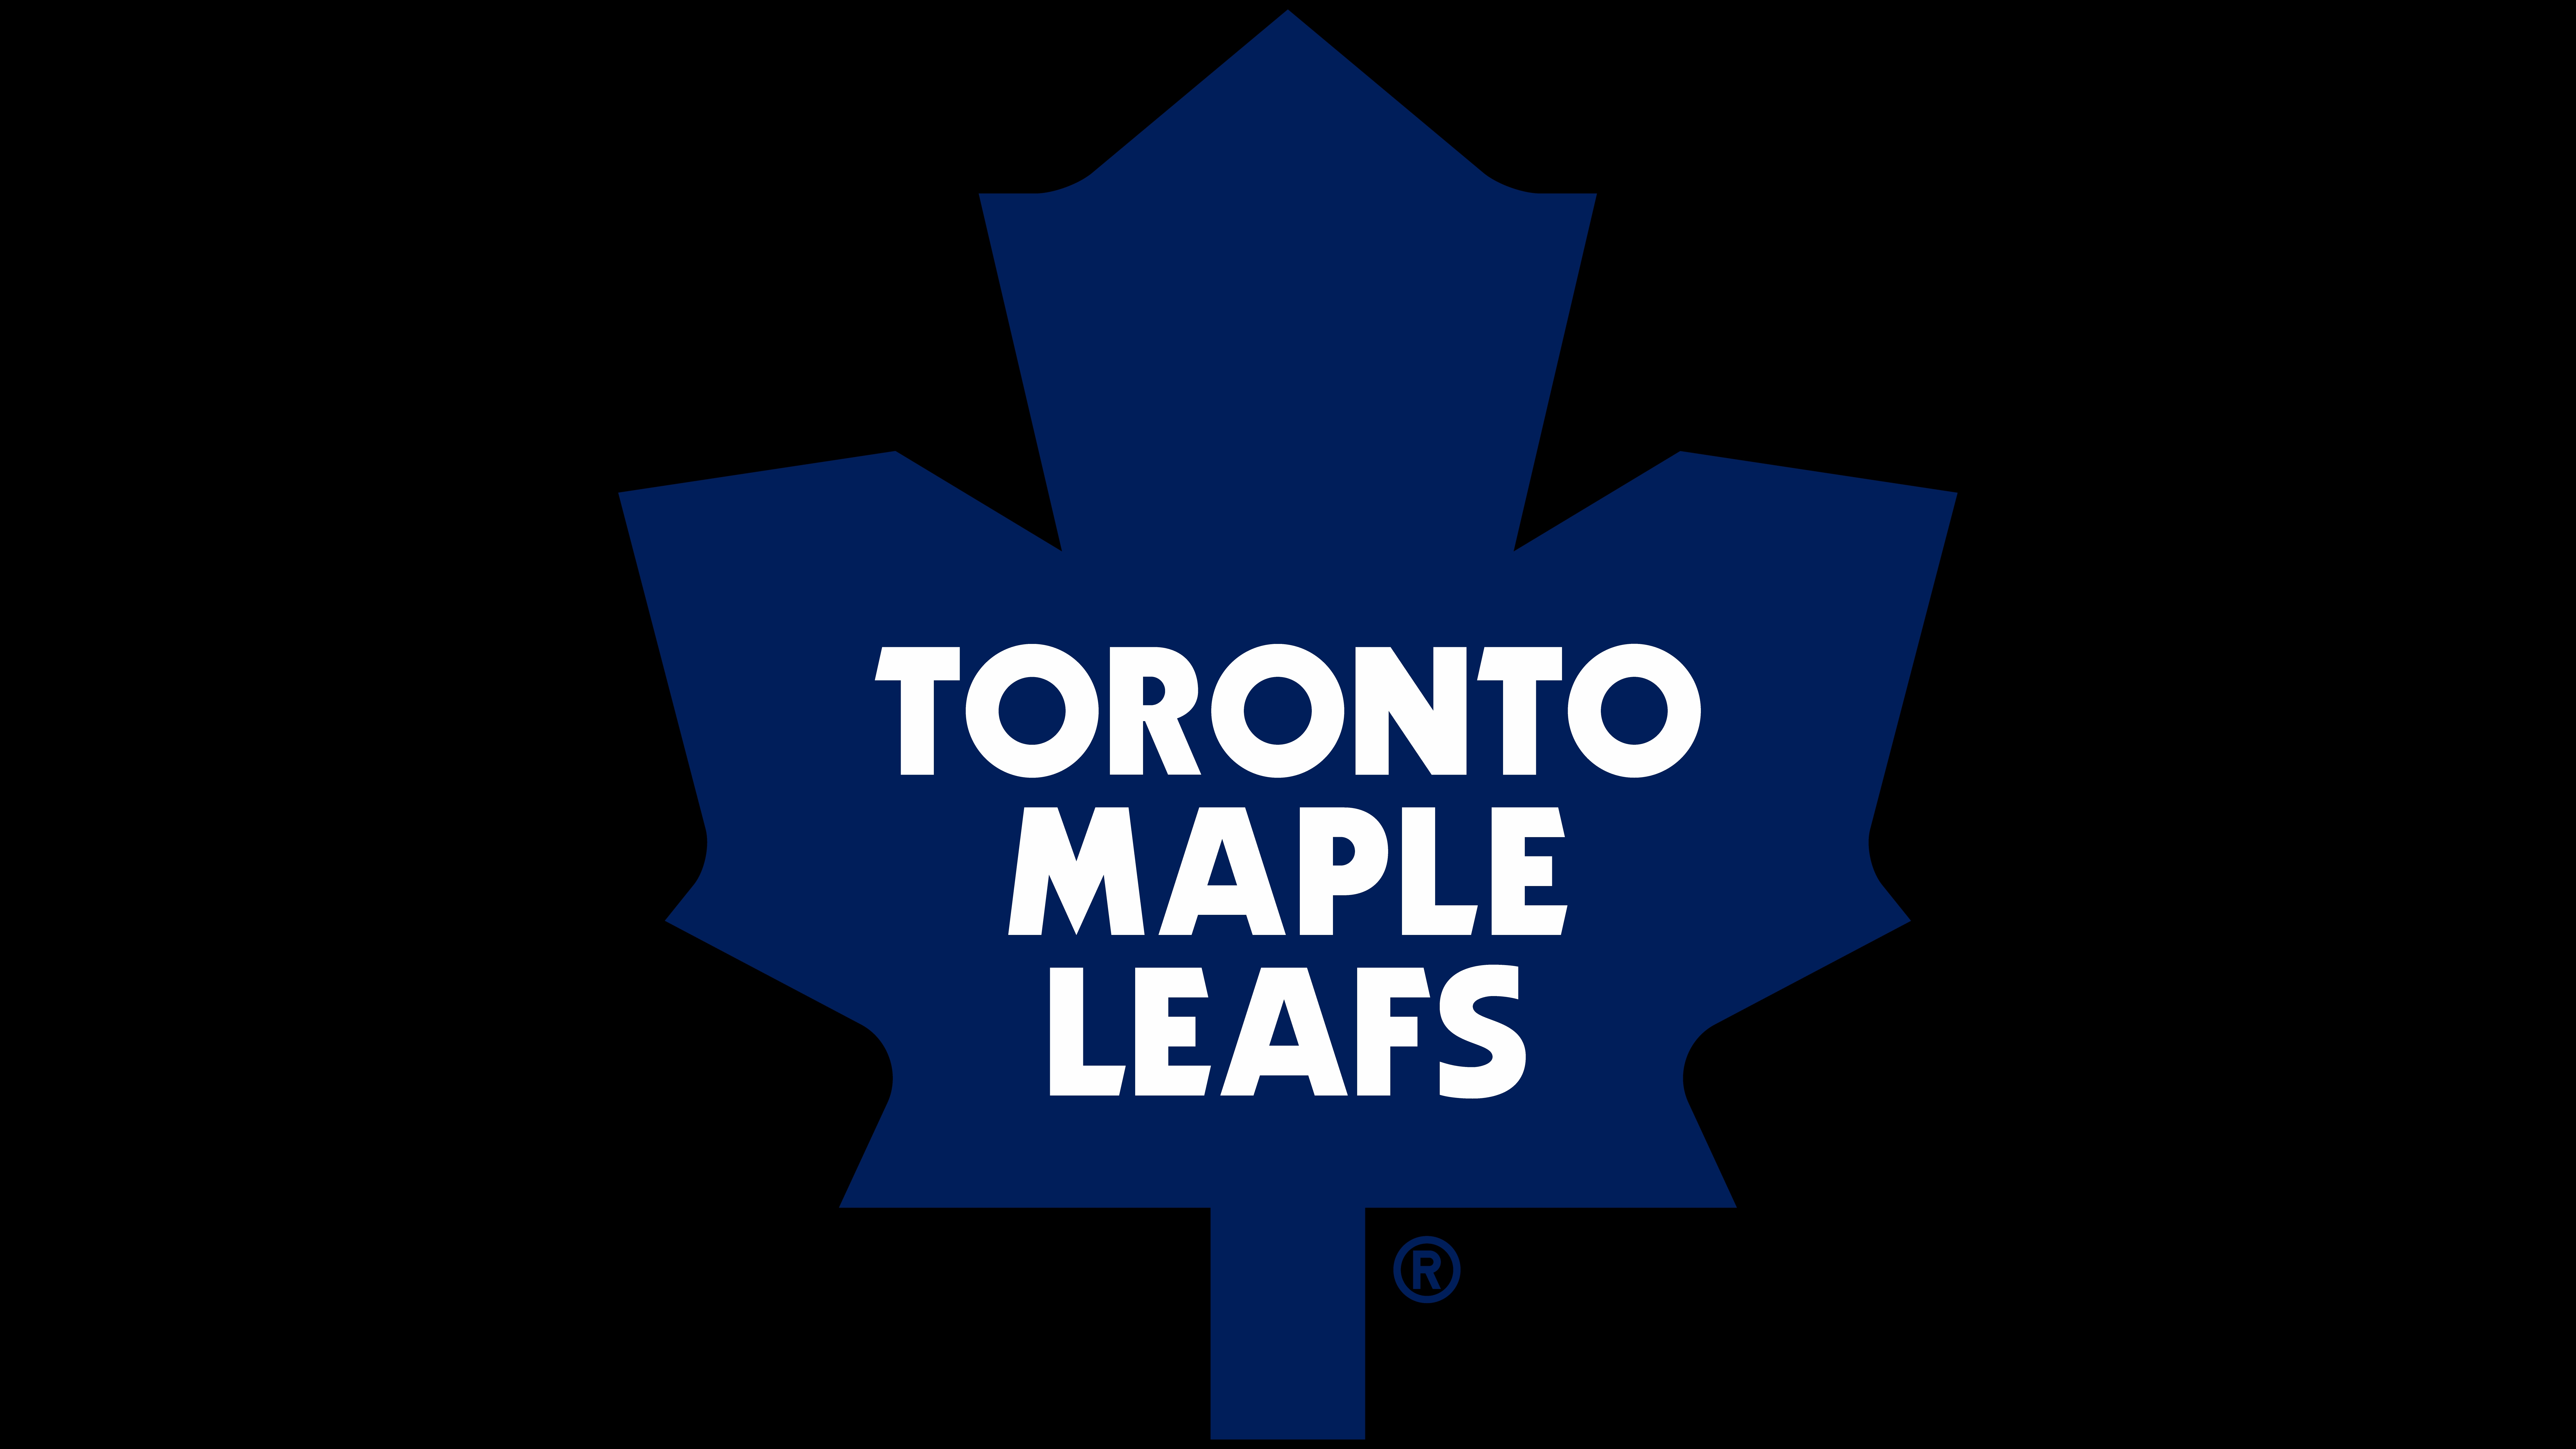 1334464 Toronto Maple Leafs 4K, NHL - Rare Gallery HD Wallpapers